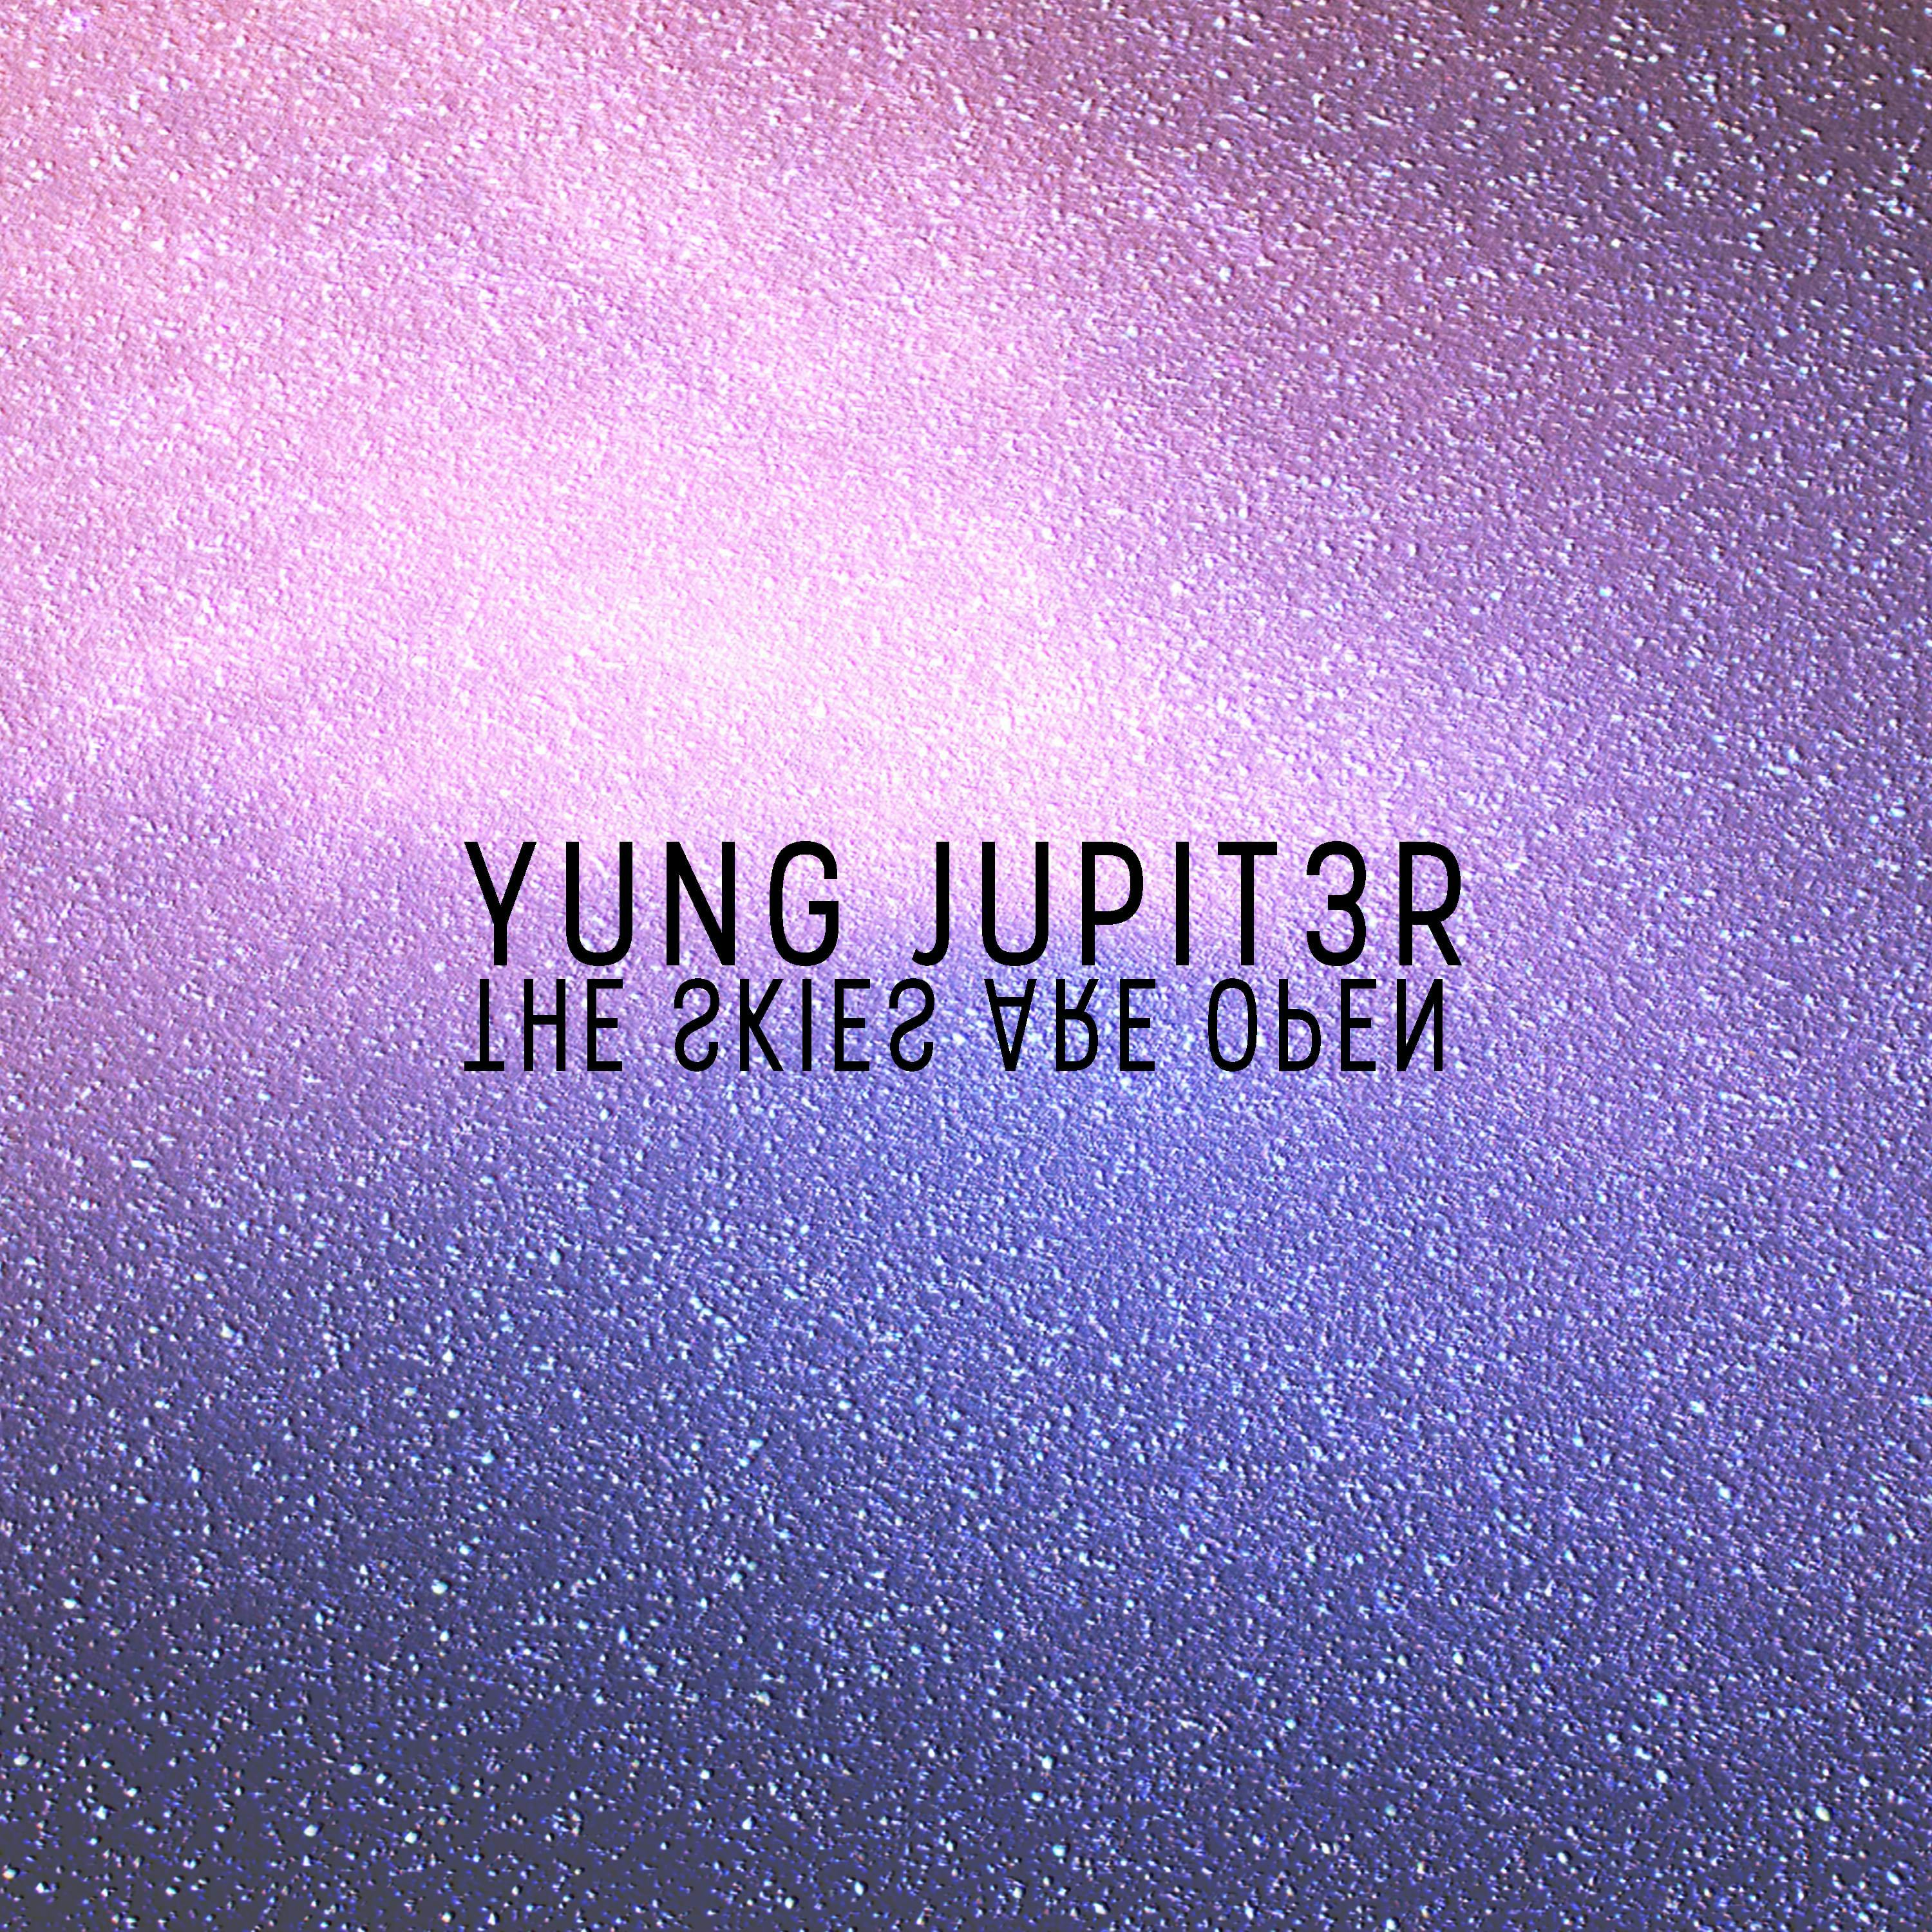 Cover art for starkey's song: Yung Jupit3r - Skies Are Open